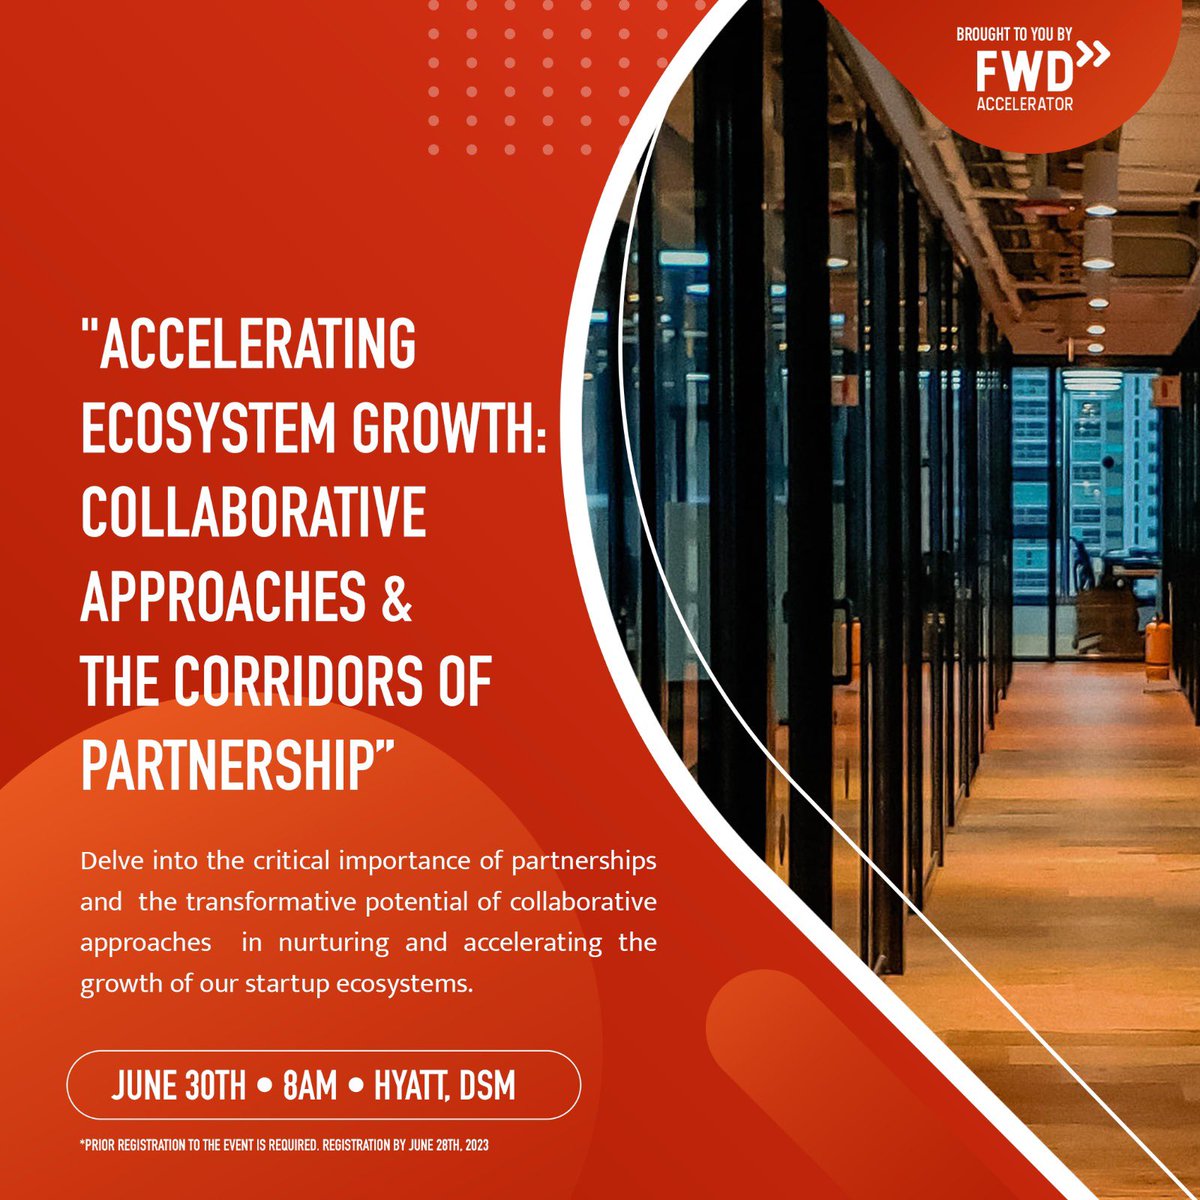 🗓️ Mark your calendars! On 30th June, FWD & WV Angels invite you to delve into the corridors of partnership, unlocking possibilities for success and ecosystem growth through collaboration & innovative approaches. To RSVP, visit bit.ly/43R7sle. Limited spaces!